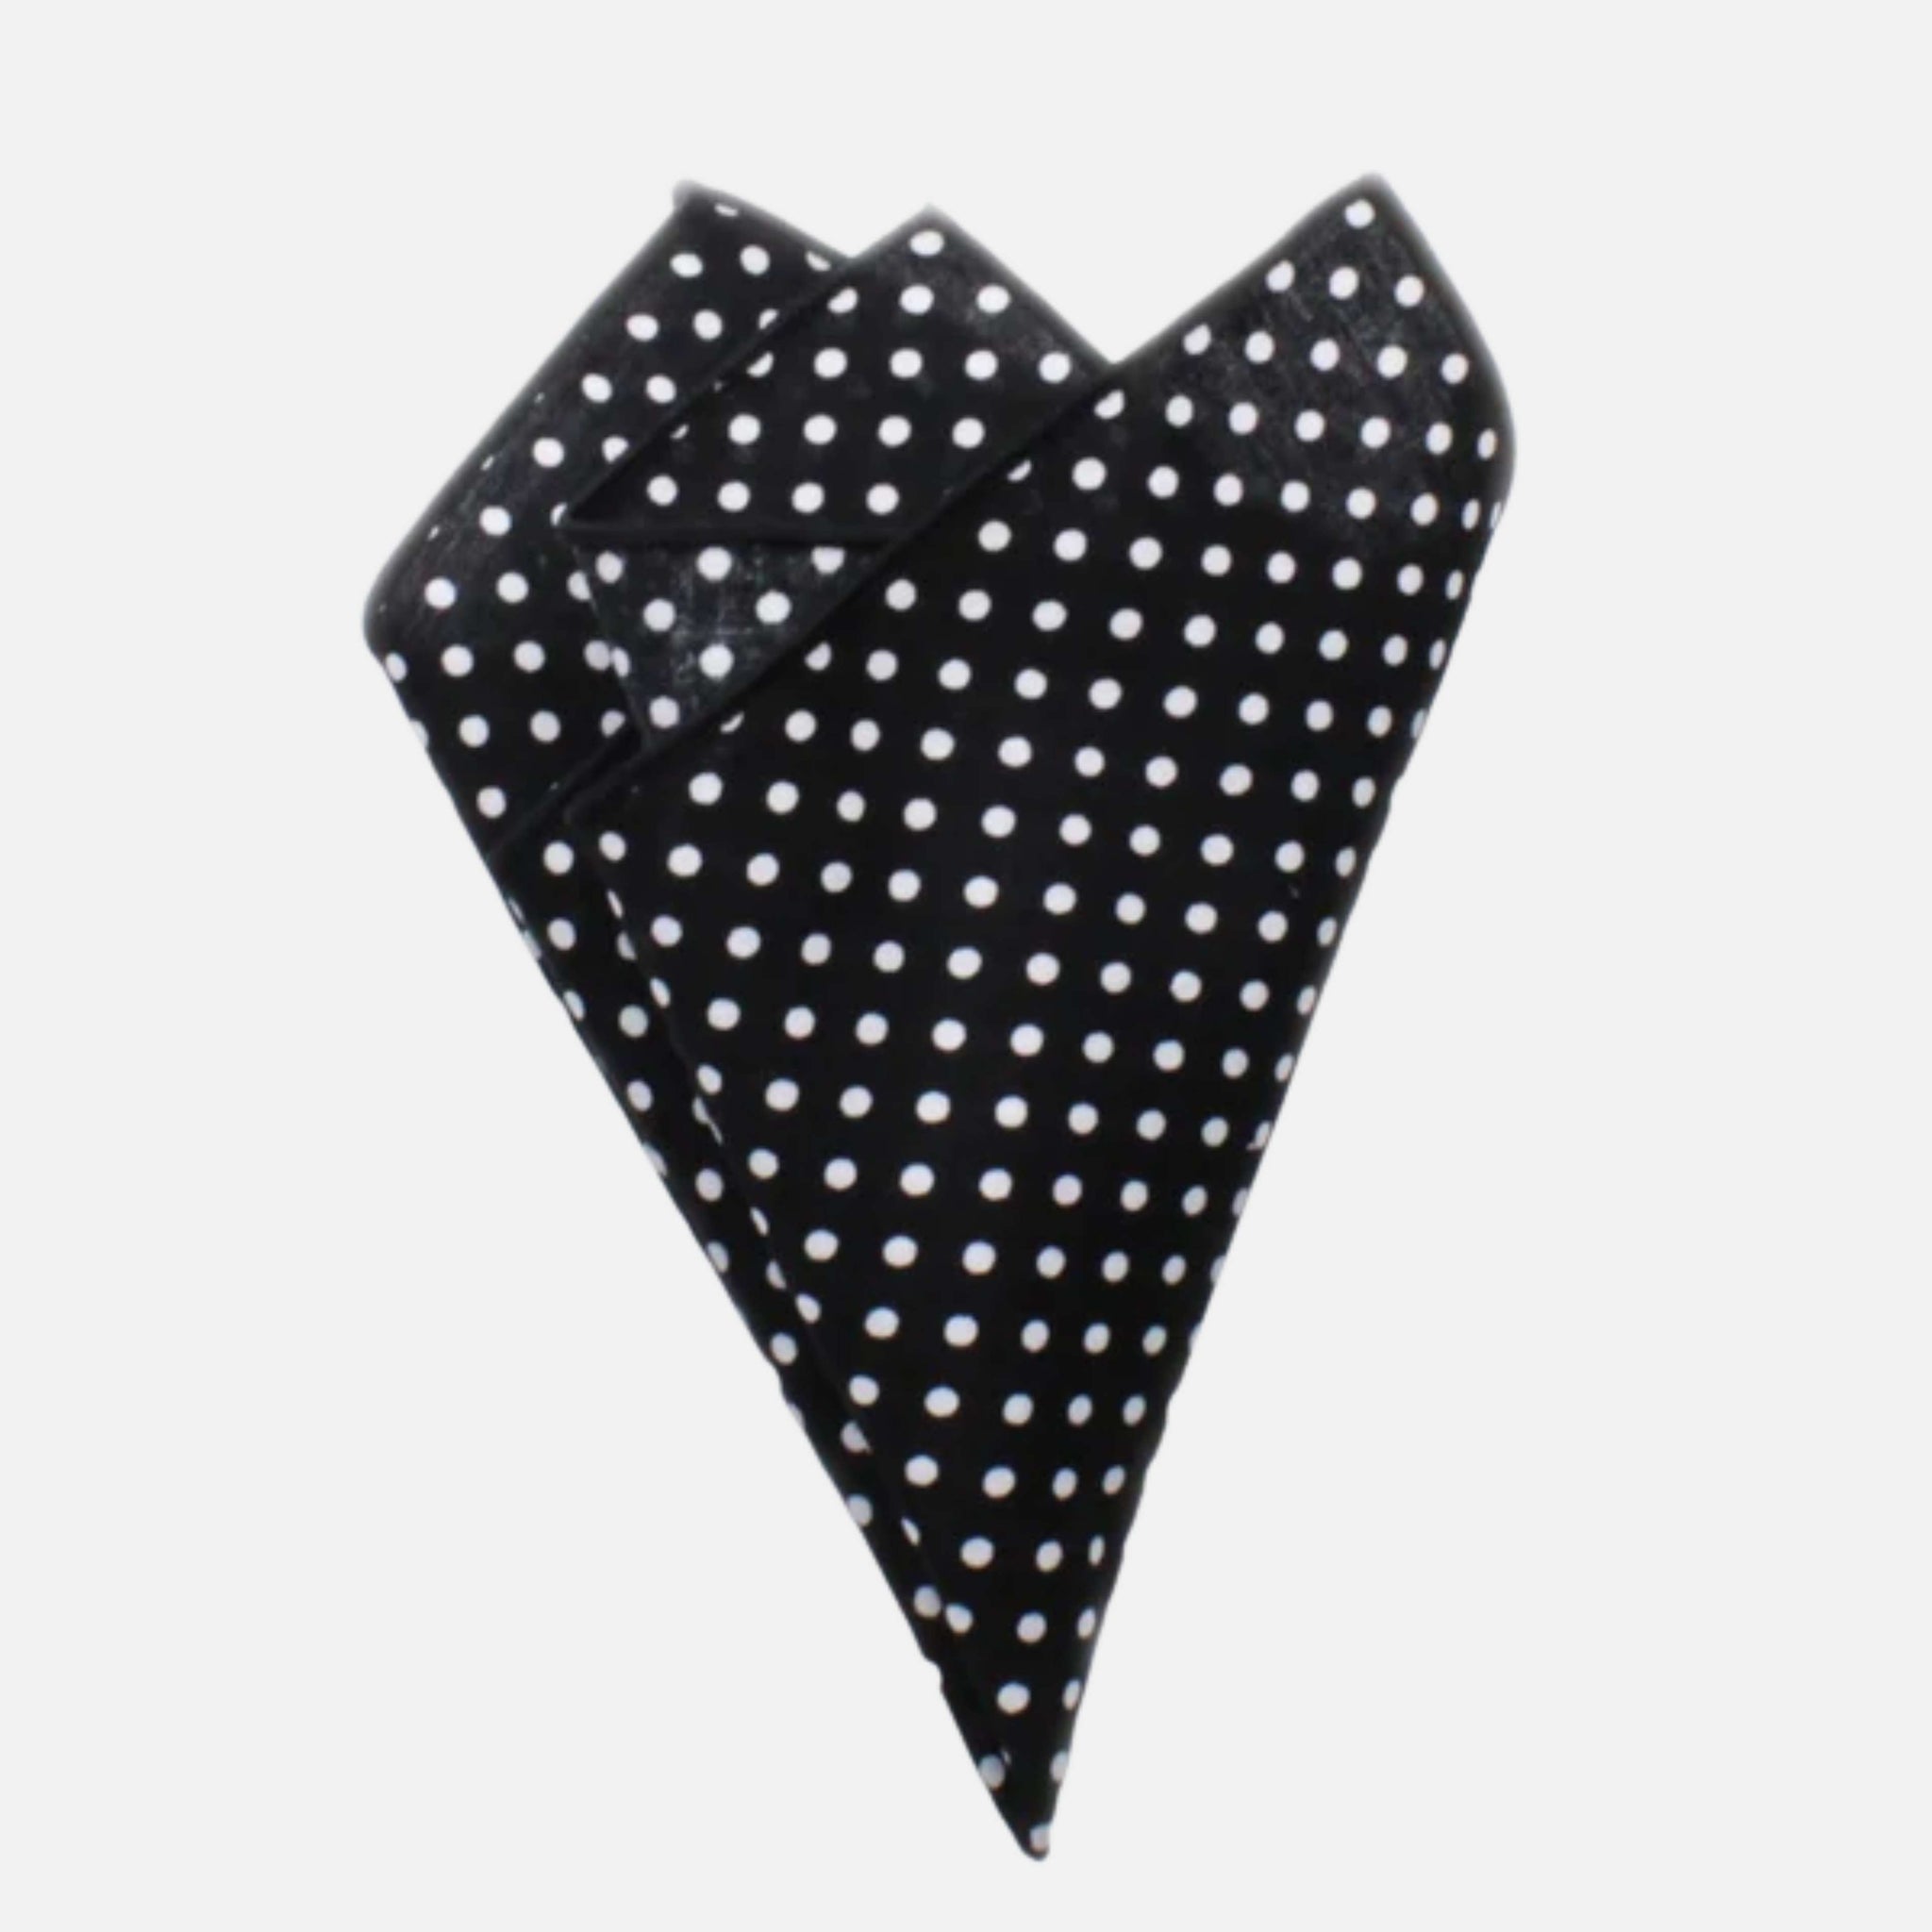 Black pocket square with small white polka dots